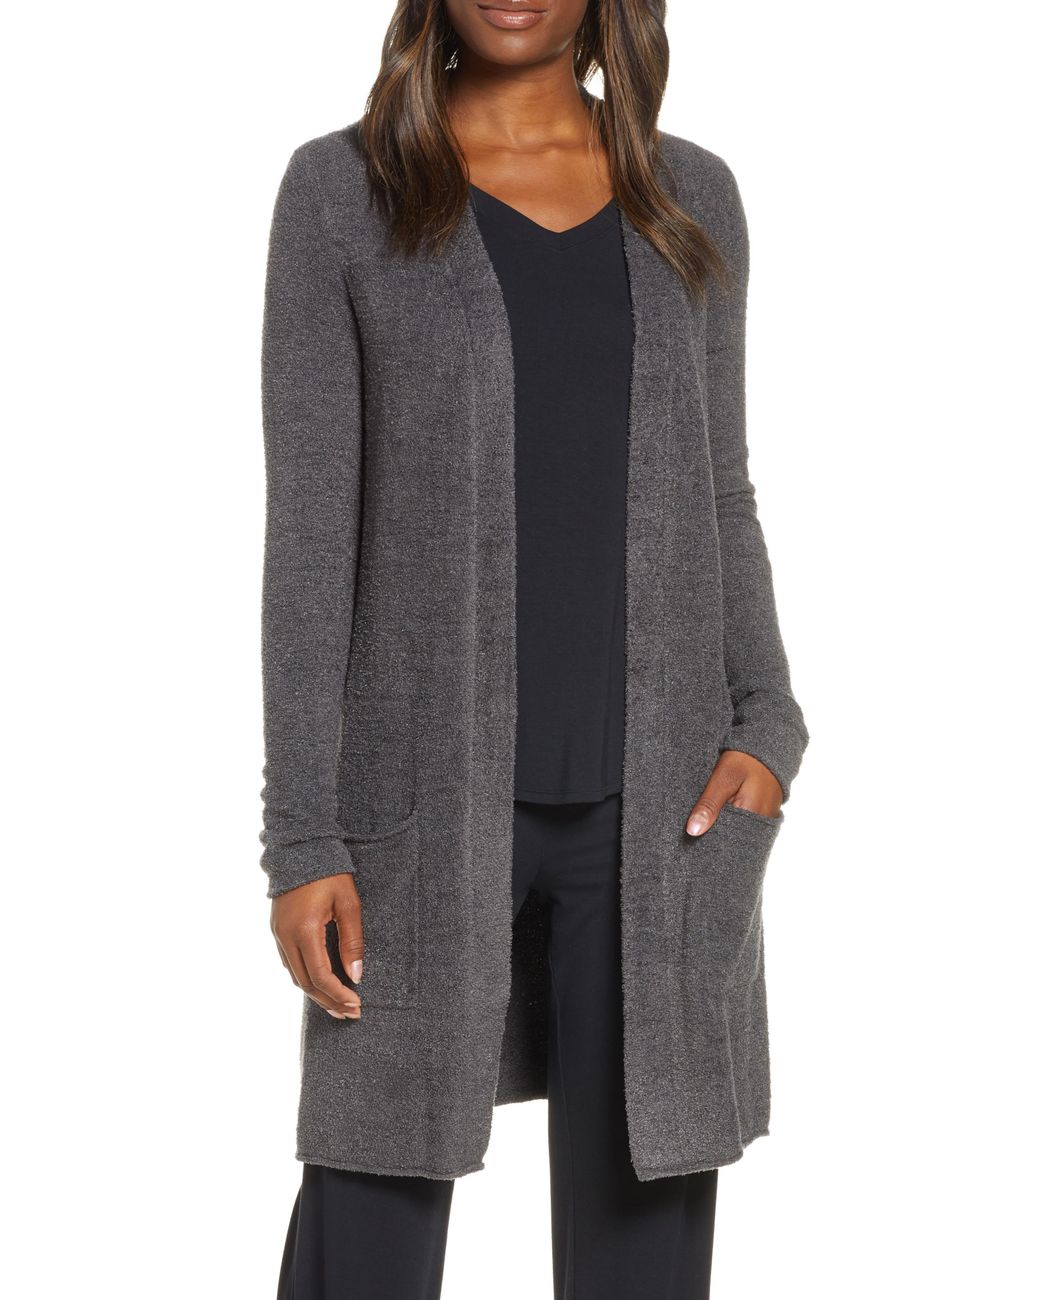 Barefoot Dreams Barefoot Dreams Cozychic Lite Long Cardigan in Carbon